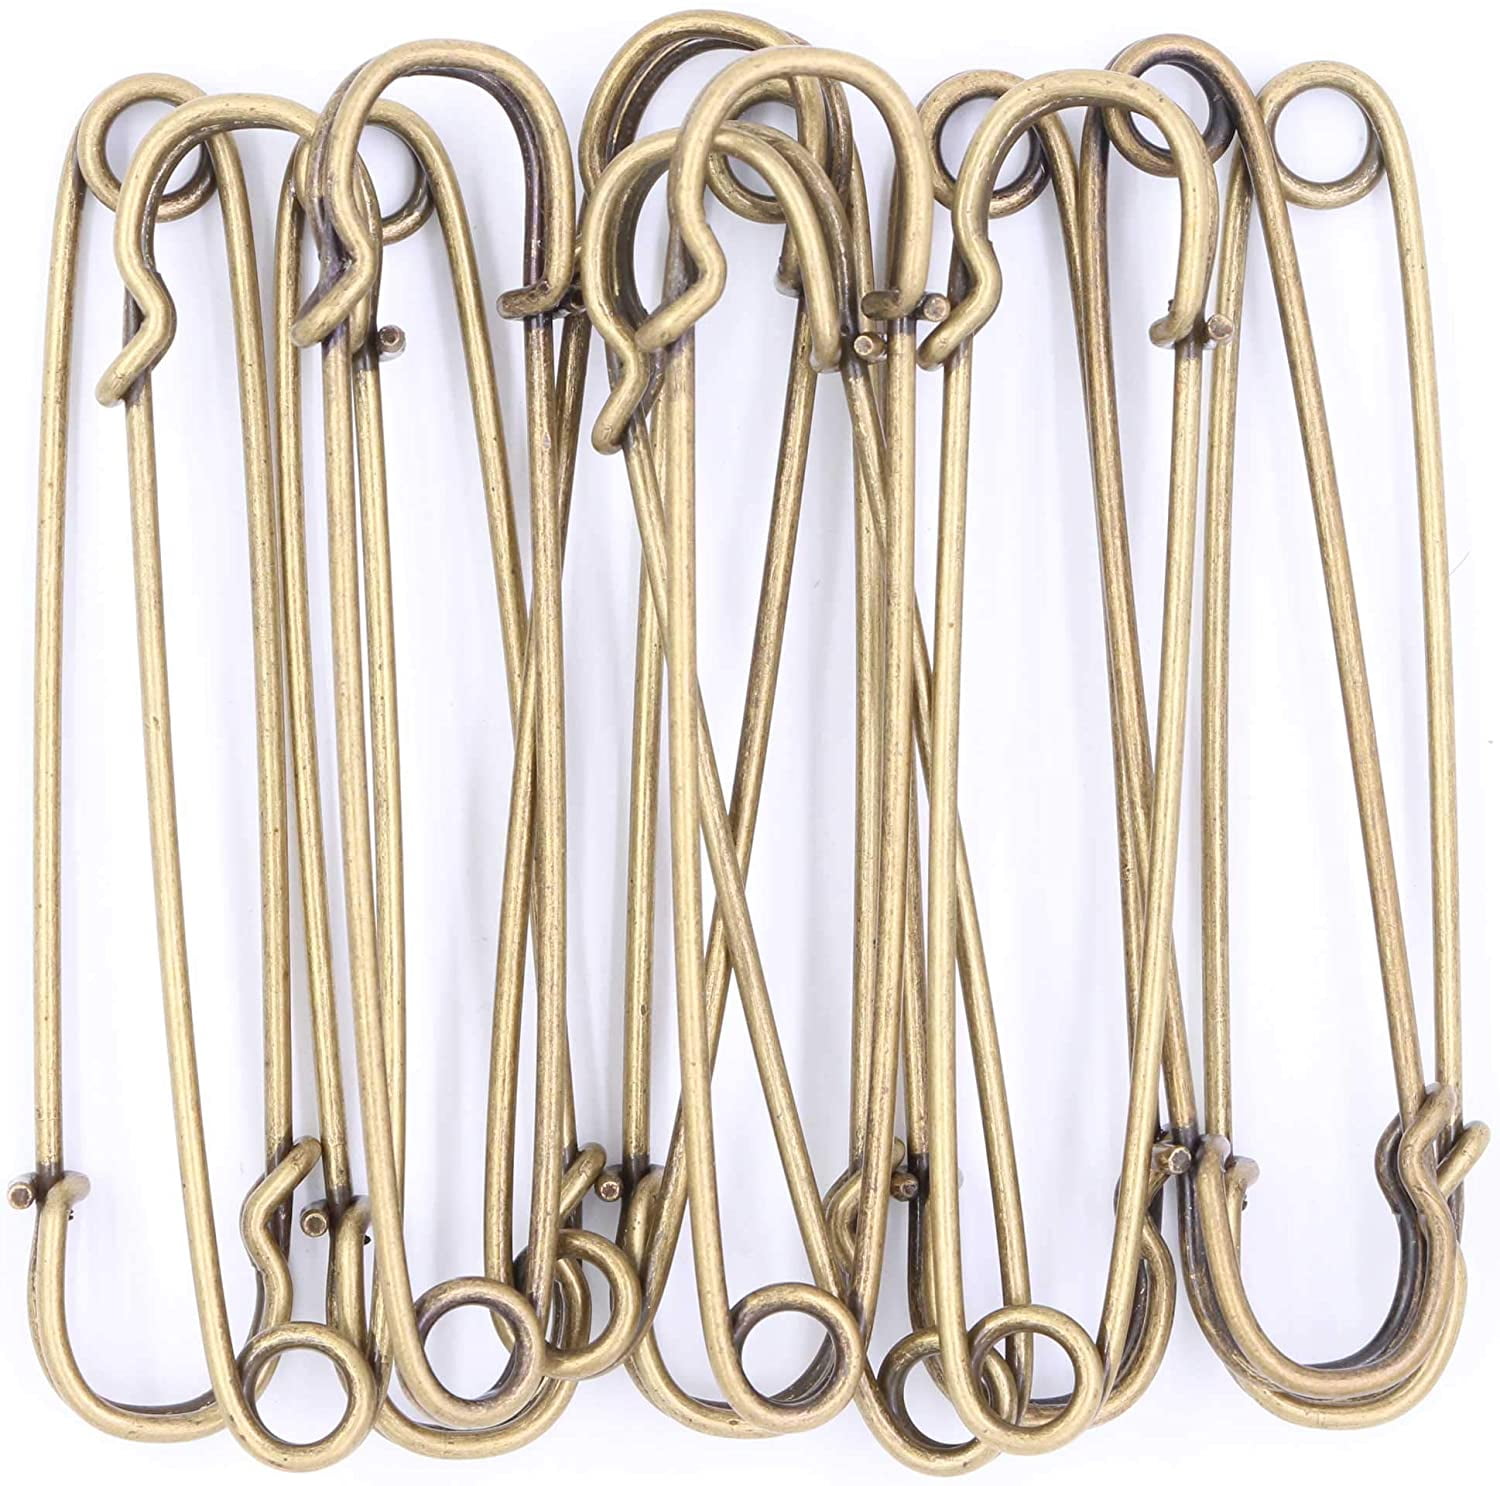 20pcs Heilwiy Large Safety Pins 4 Inch Kilt Pins Extra Large Pins